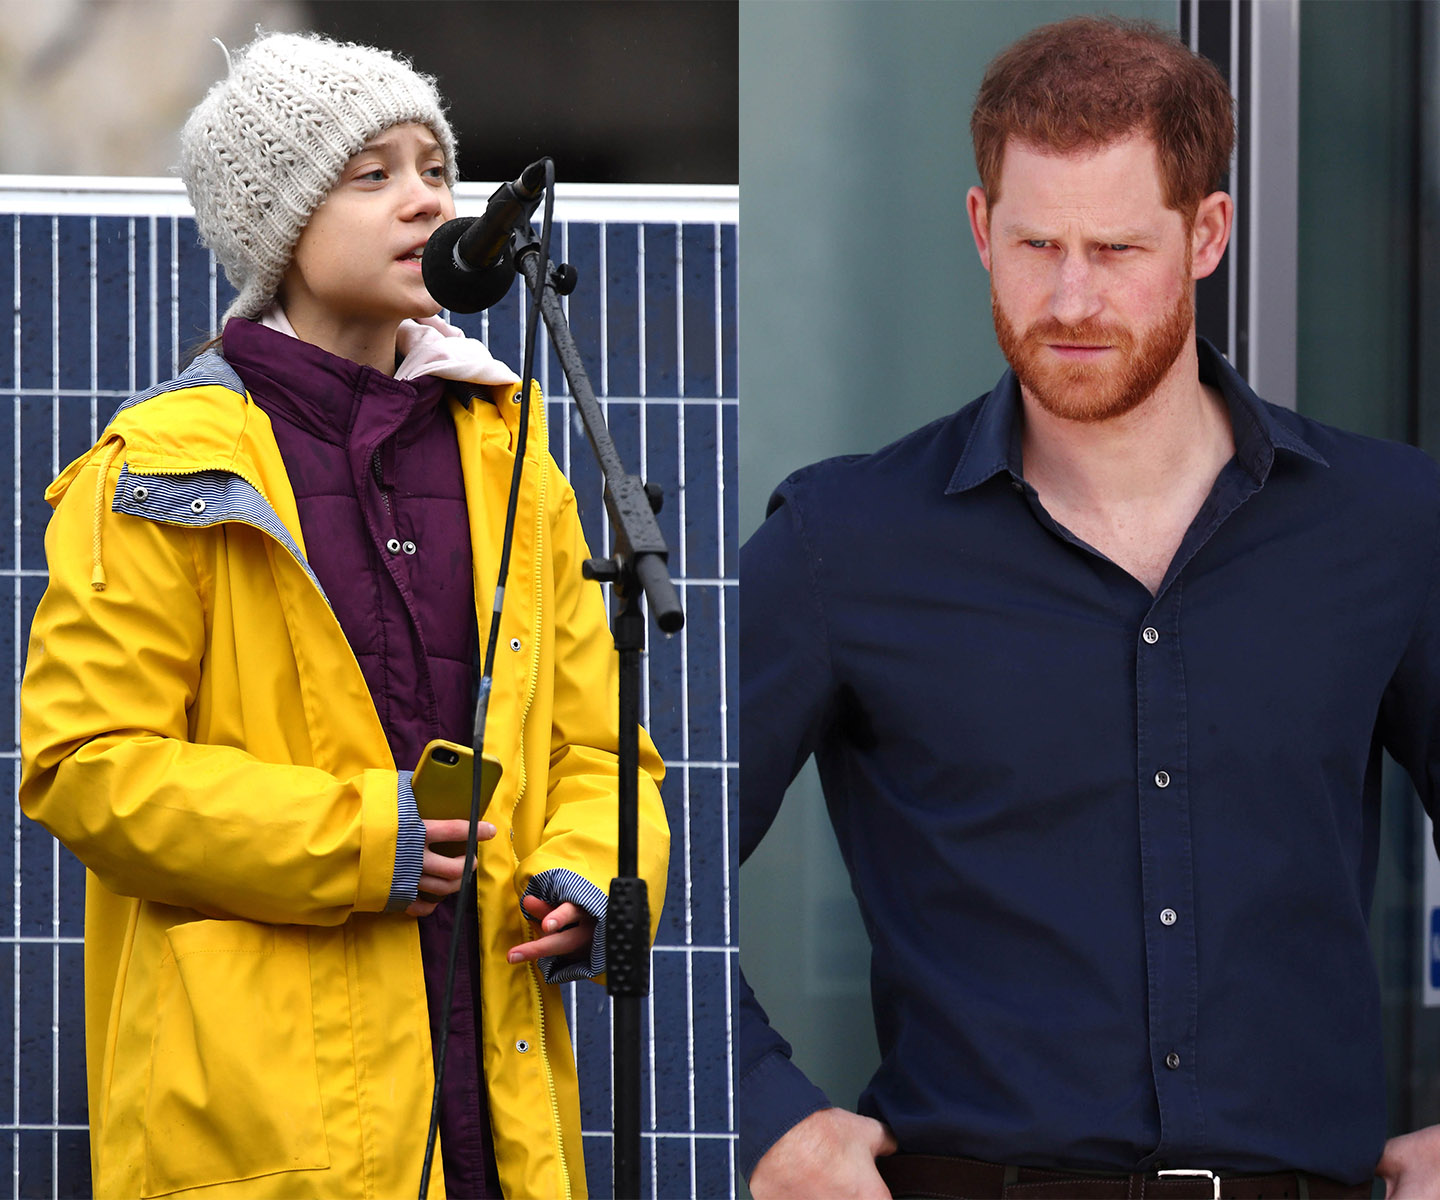 Prince Harry has allegedly fallen victim to hoax phone calls from Russian pranksters posing as Greta Thunberg